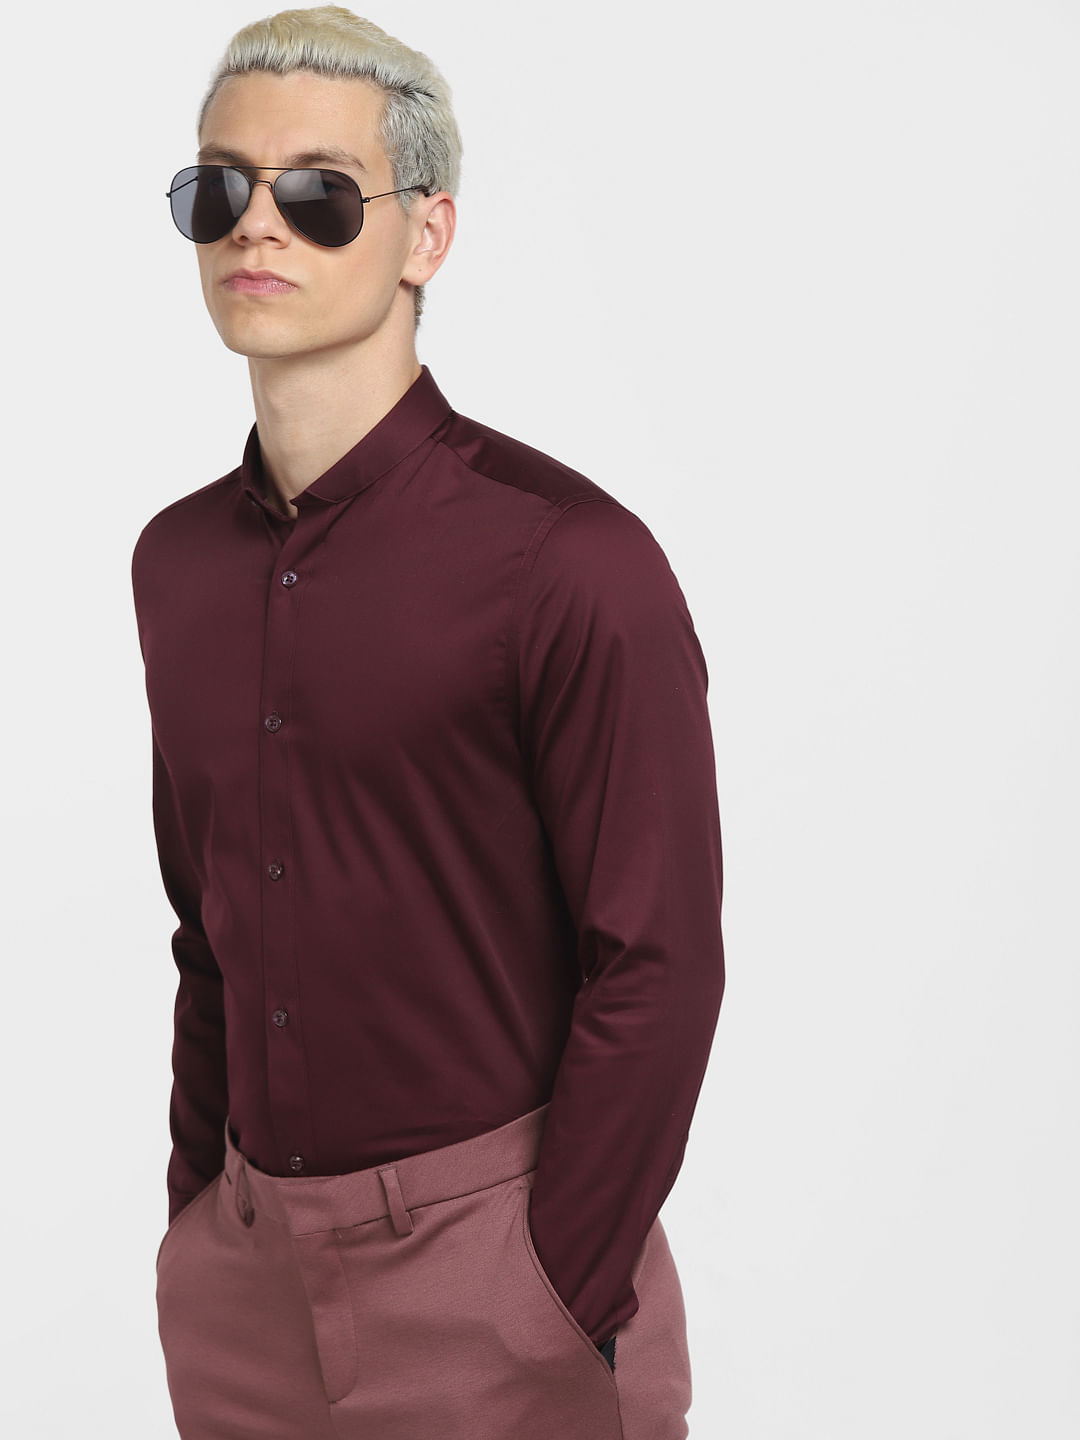 Black Pants with Burgundy Shirt Fall Outfits For Men 86 ideas  outfits   Lookastic